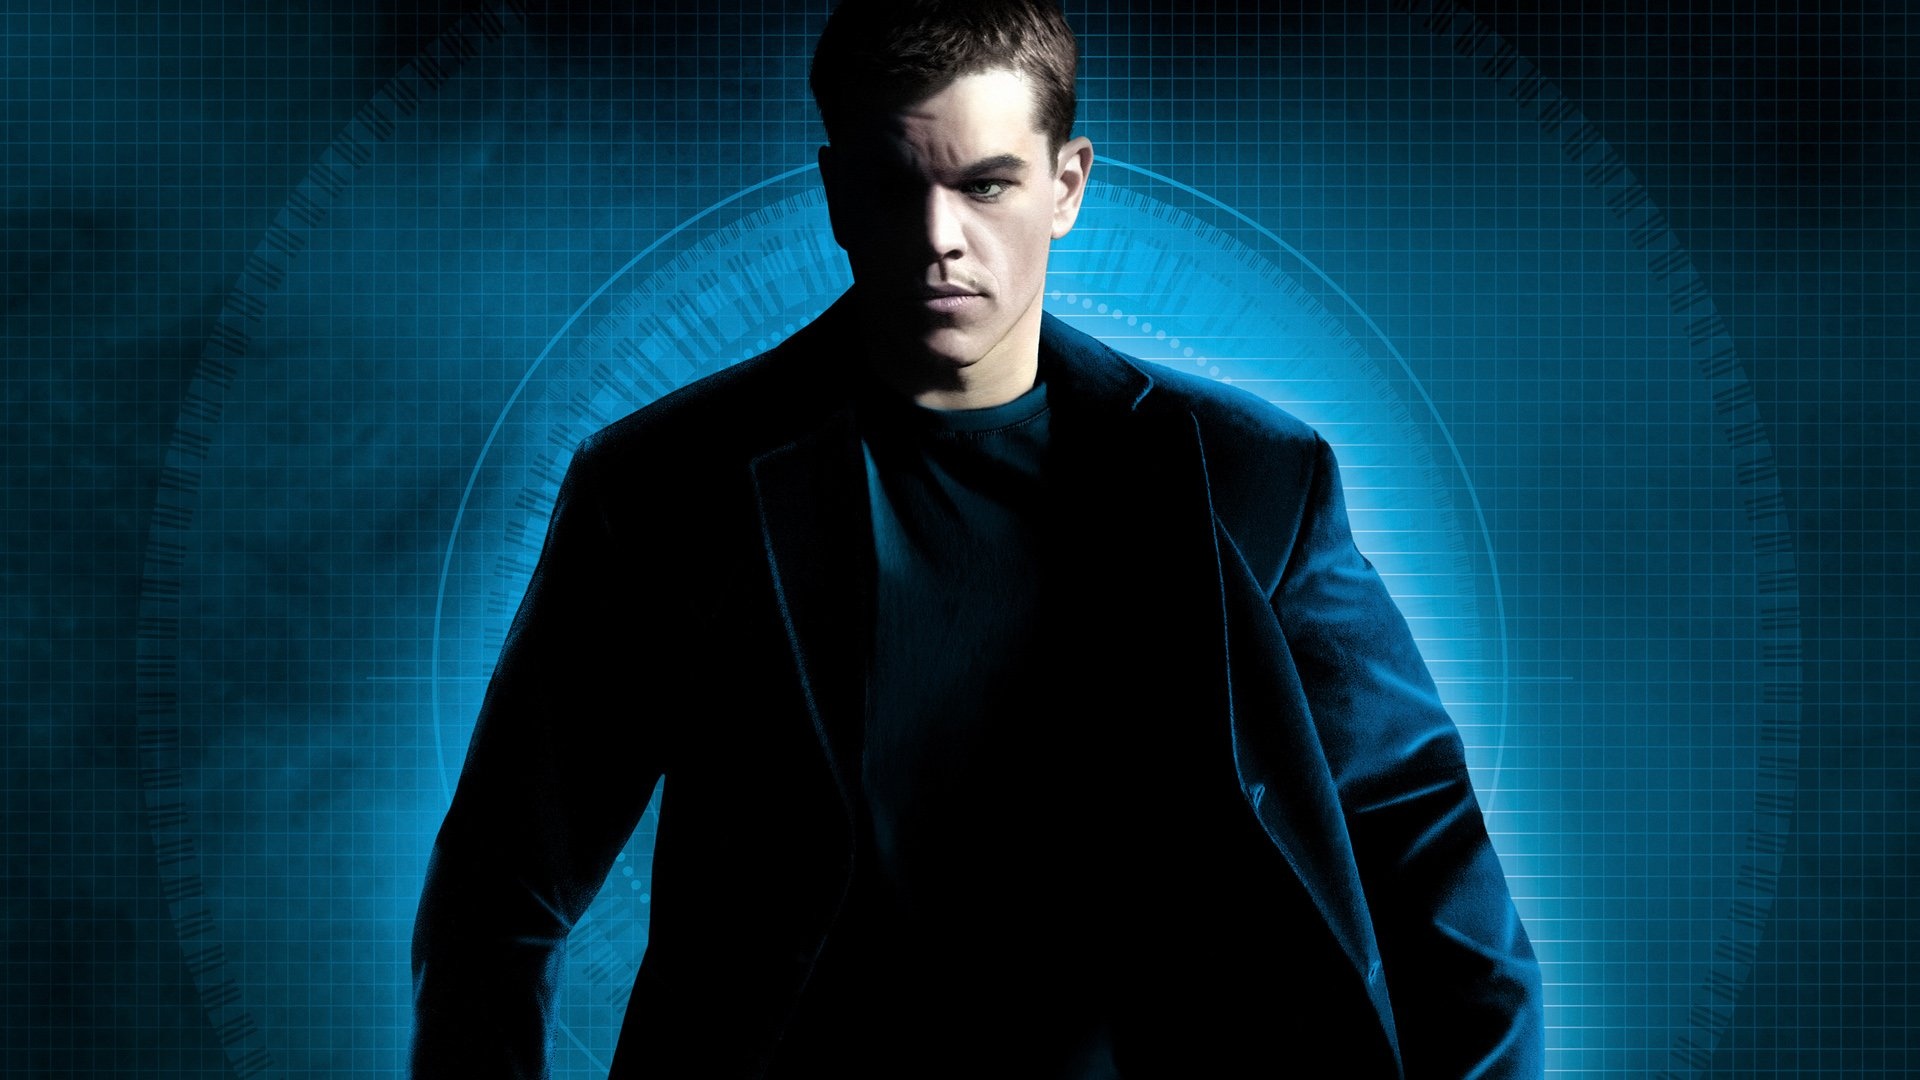 The Bourne: A 2004 action-thriller film featuring Robert Ludlum's character. 1920x1080 Full HD Wallpaper.